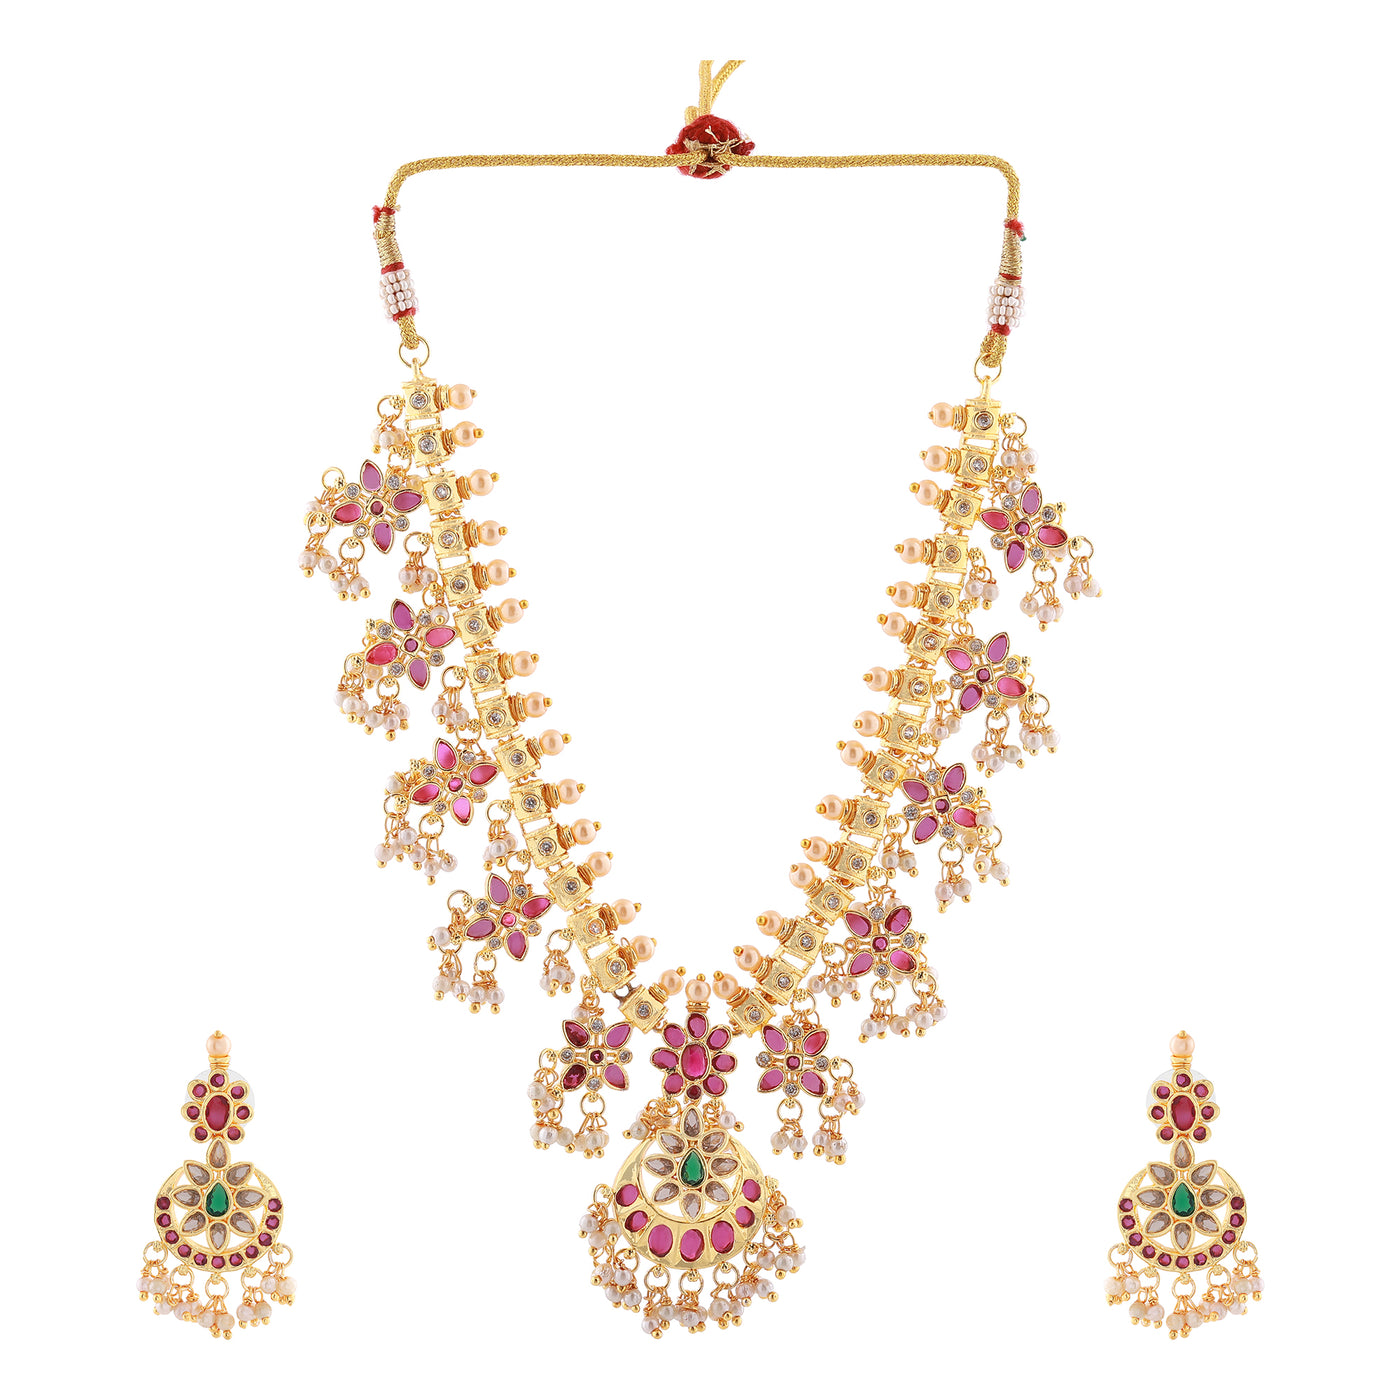 Estele Gold Plated CZ Traditional Machlipatnam Bridal Necklace Set with Pearls & Colored Crystals for Women